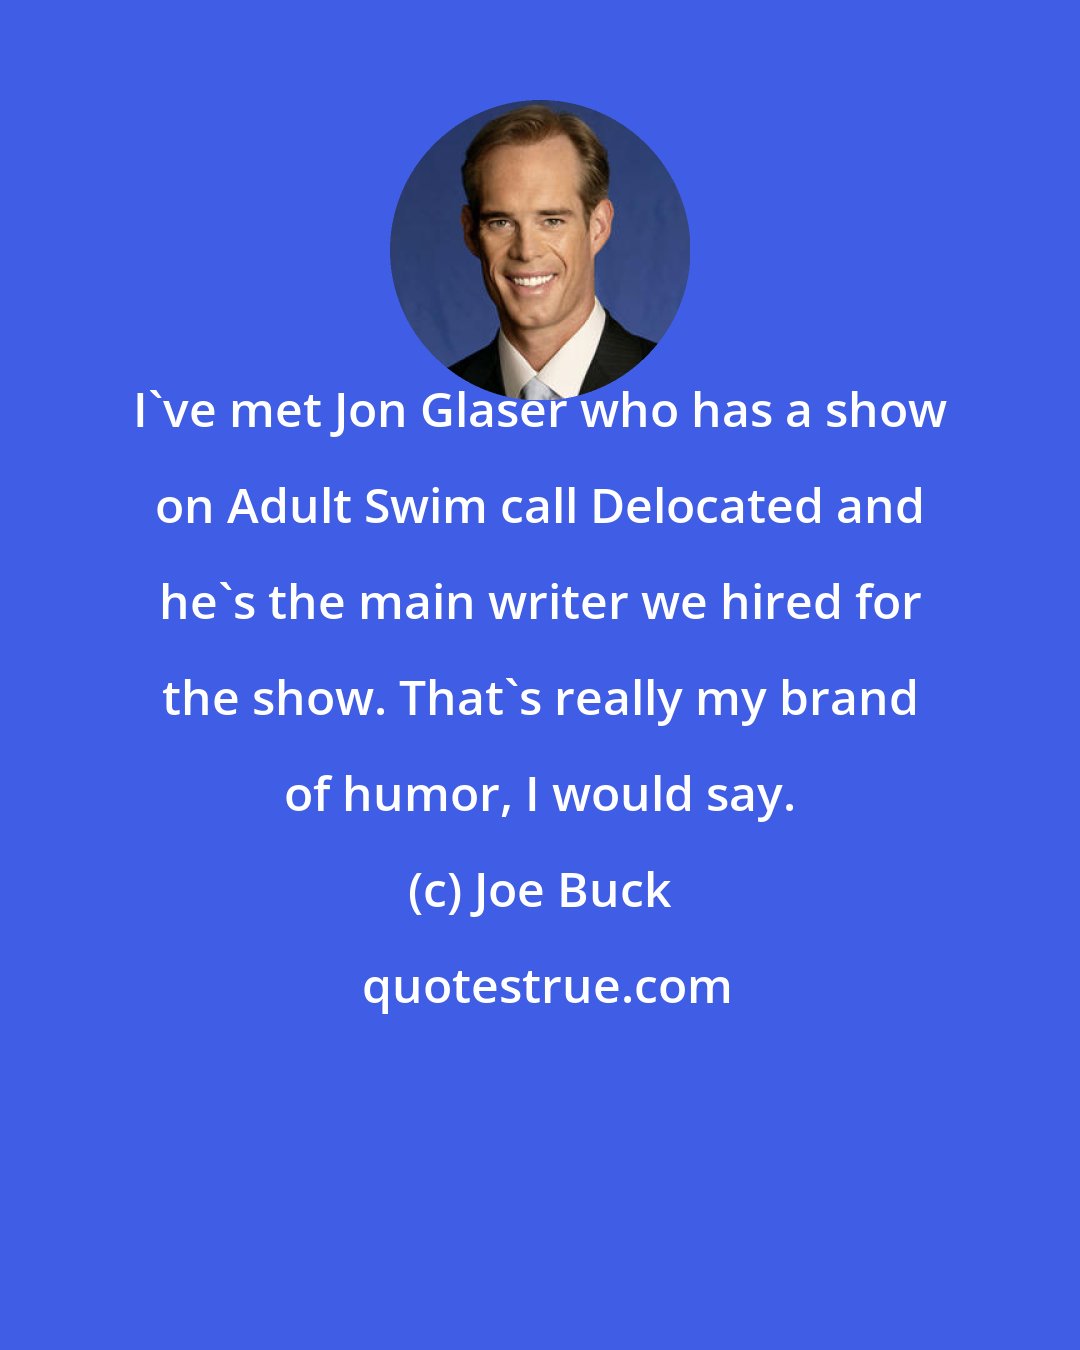 Joe Buck: I've met Jon Glaser who has a show on Adult Swim call Delocated and he's the main writer we hired for the show. That's really my brand of humor, I would say.